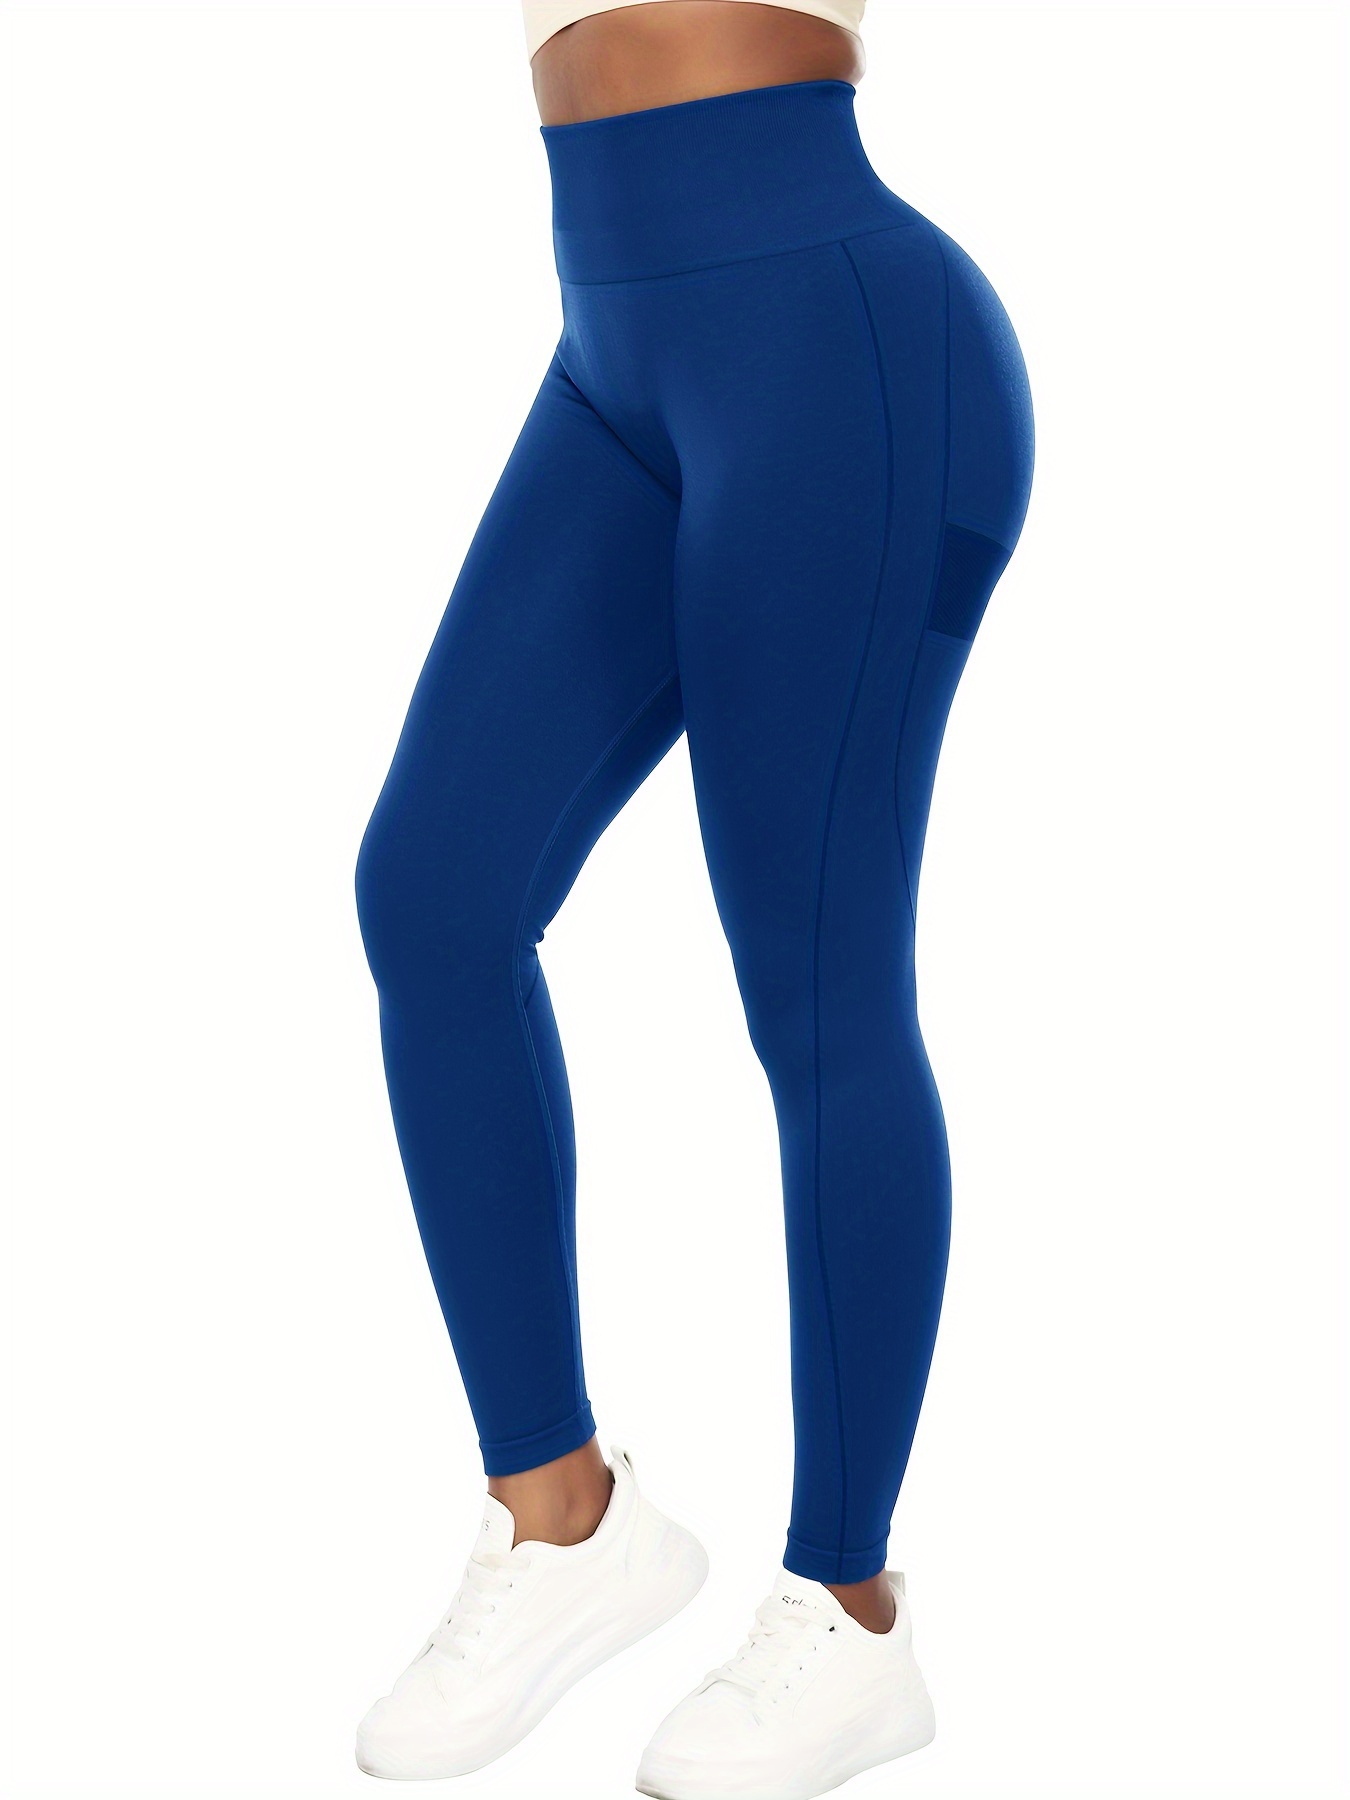 Women Seamless High Waist Butt Lift Leggings Contouring Booty Workout Yoga  Pants Tummy Control Running Tights (Blue, M) at  Women's Clothing  store